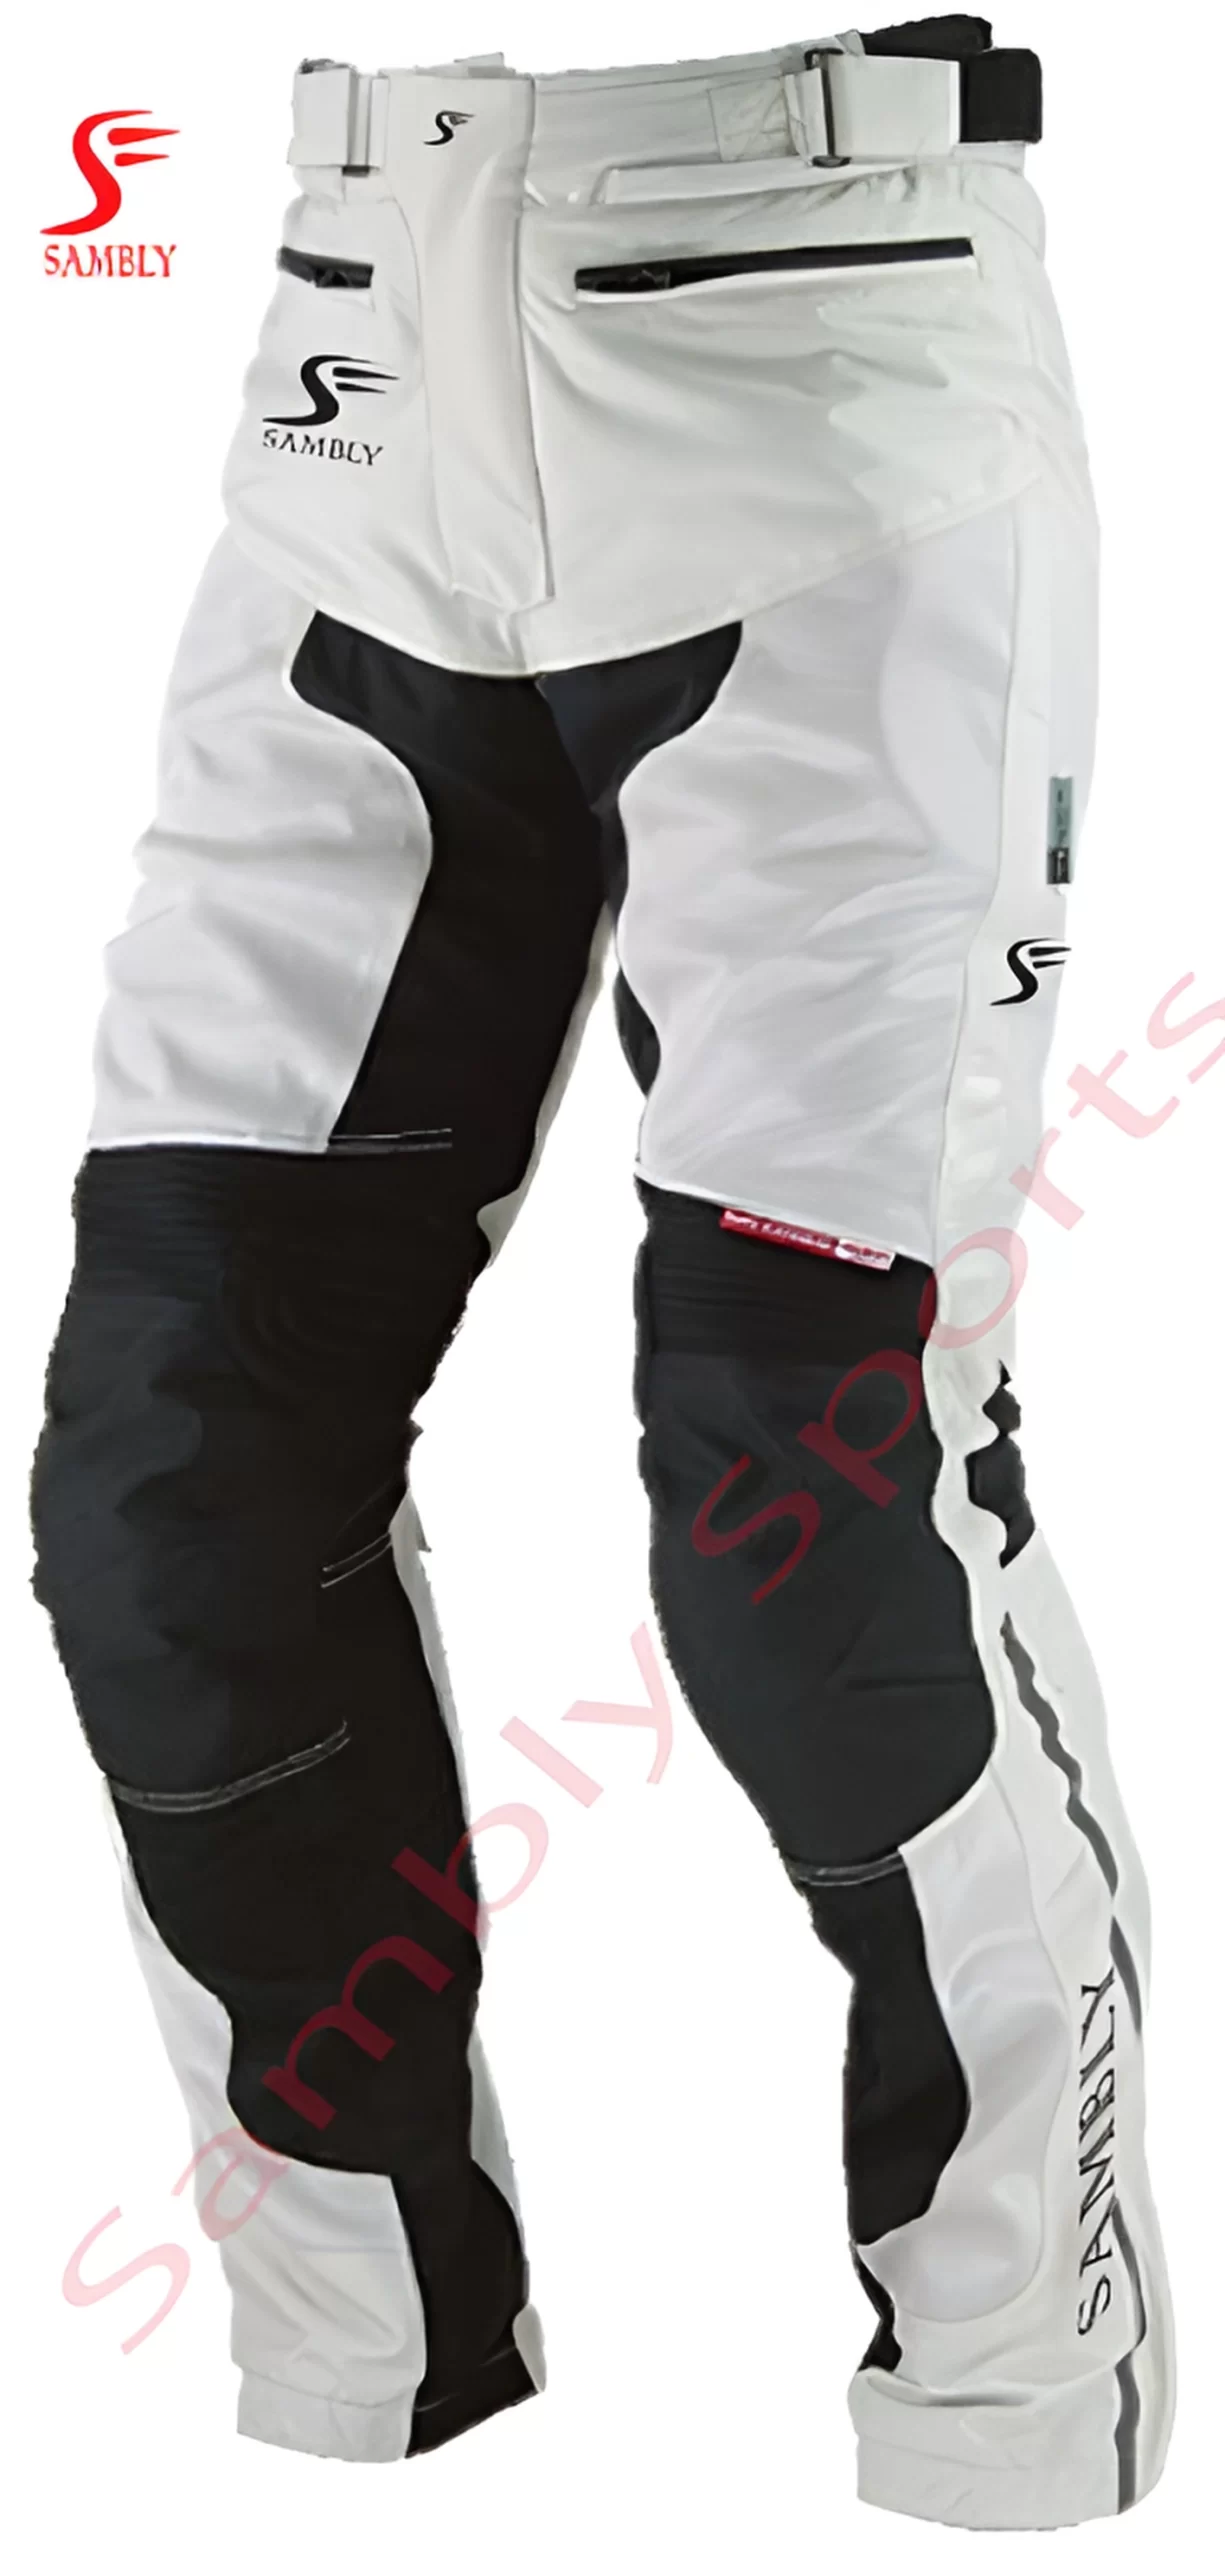 Front View of the Motorbike Textile Pants SS-605 by Sambly Sports